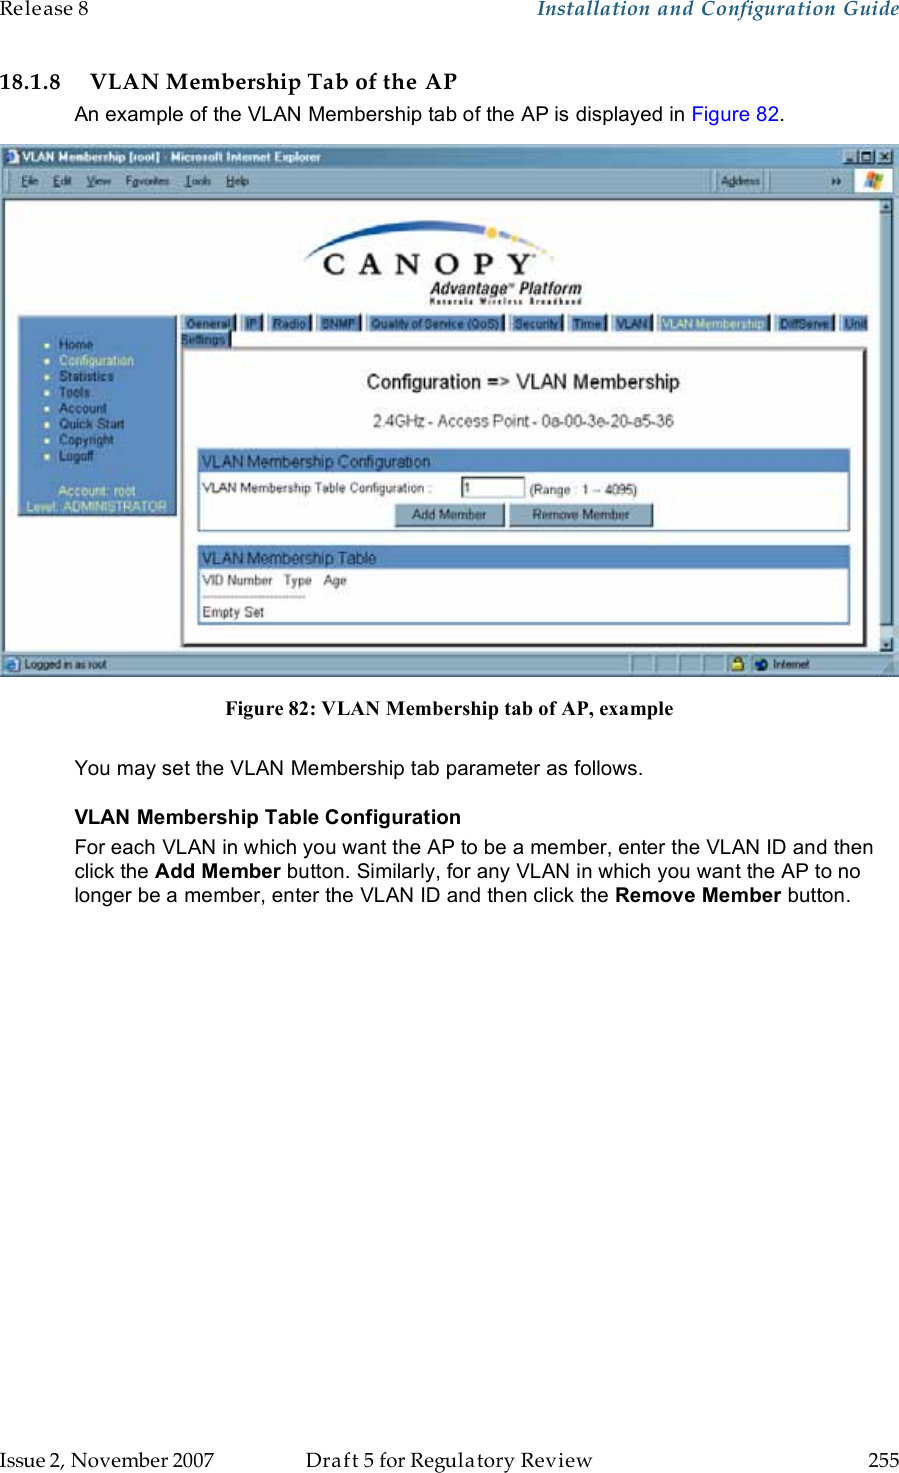 Release 8    Installation and Configuration Guide   Issue 2, November 2007  Draft 5 for Regulatory Review  255     18.1.8 VLAN Membership Tab of the AP An example of the VLAN Membership tab of the AP is displayed in Figure 82.  Figure 82: VLAN Membership tab of AP, example  You may set the VLAN Membership tab parameter as follows. VLAN Membership Table Configuration For each VLAN in which you want the AP to be a member, enter the VLAN ID and then click the Add Member button. Similarly, for any VLAN in which you want the AP to no longer be a member, enter the VLAN ID and then click the Remove Member button. 